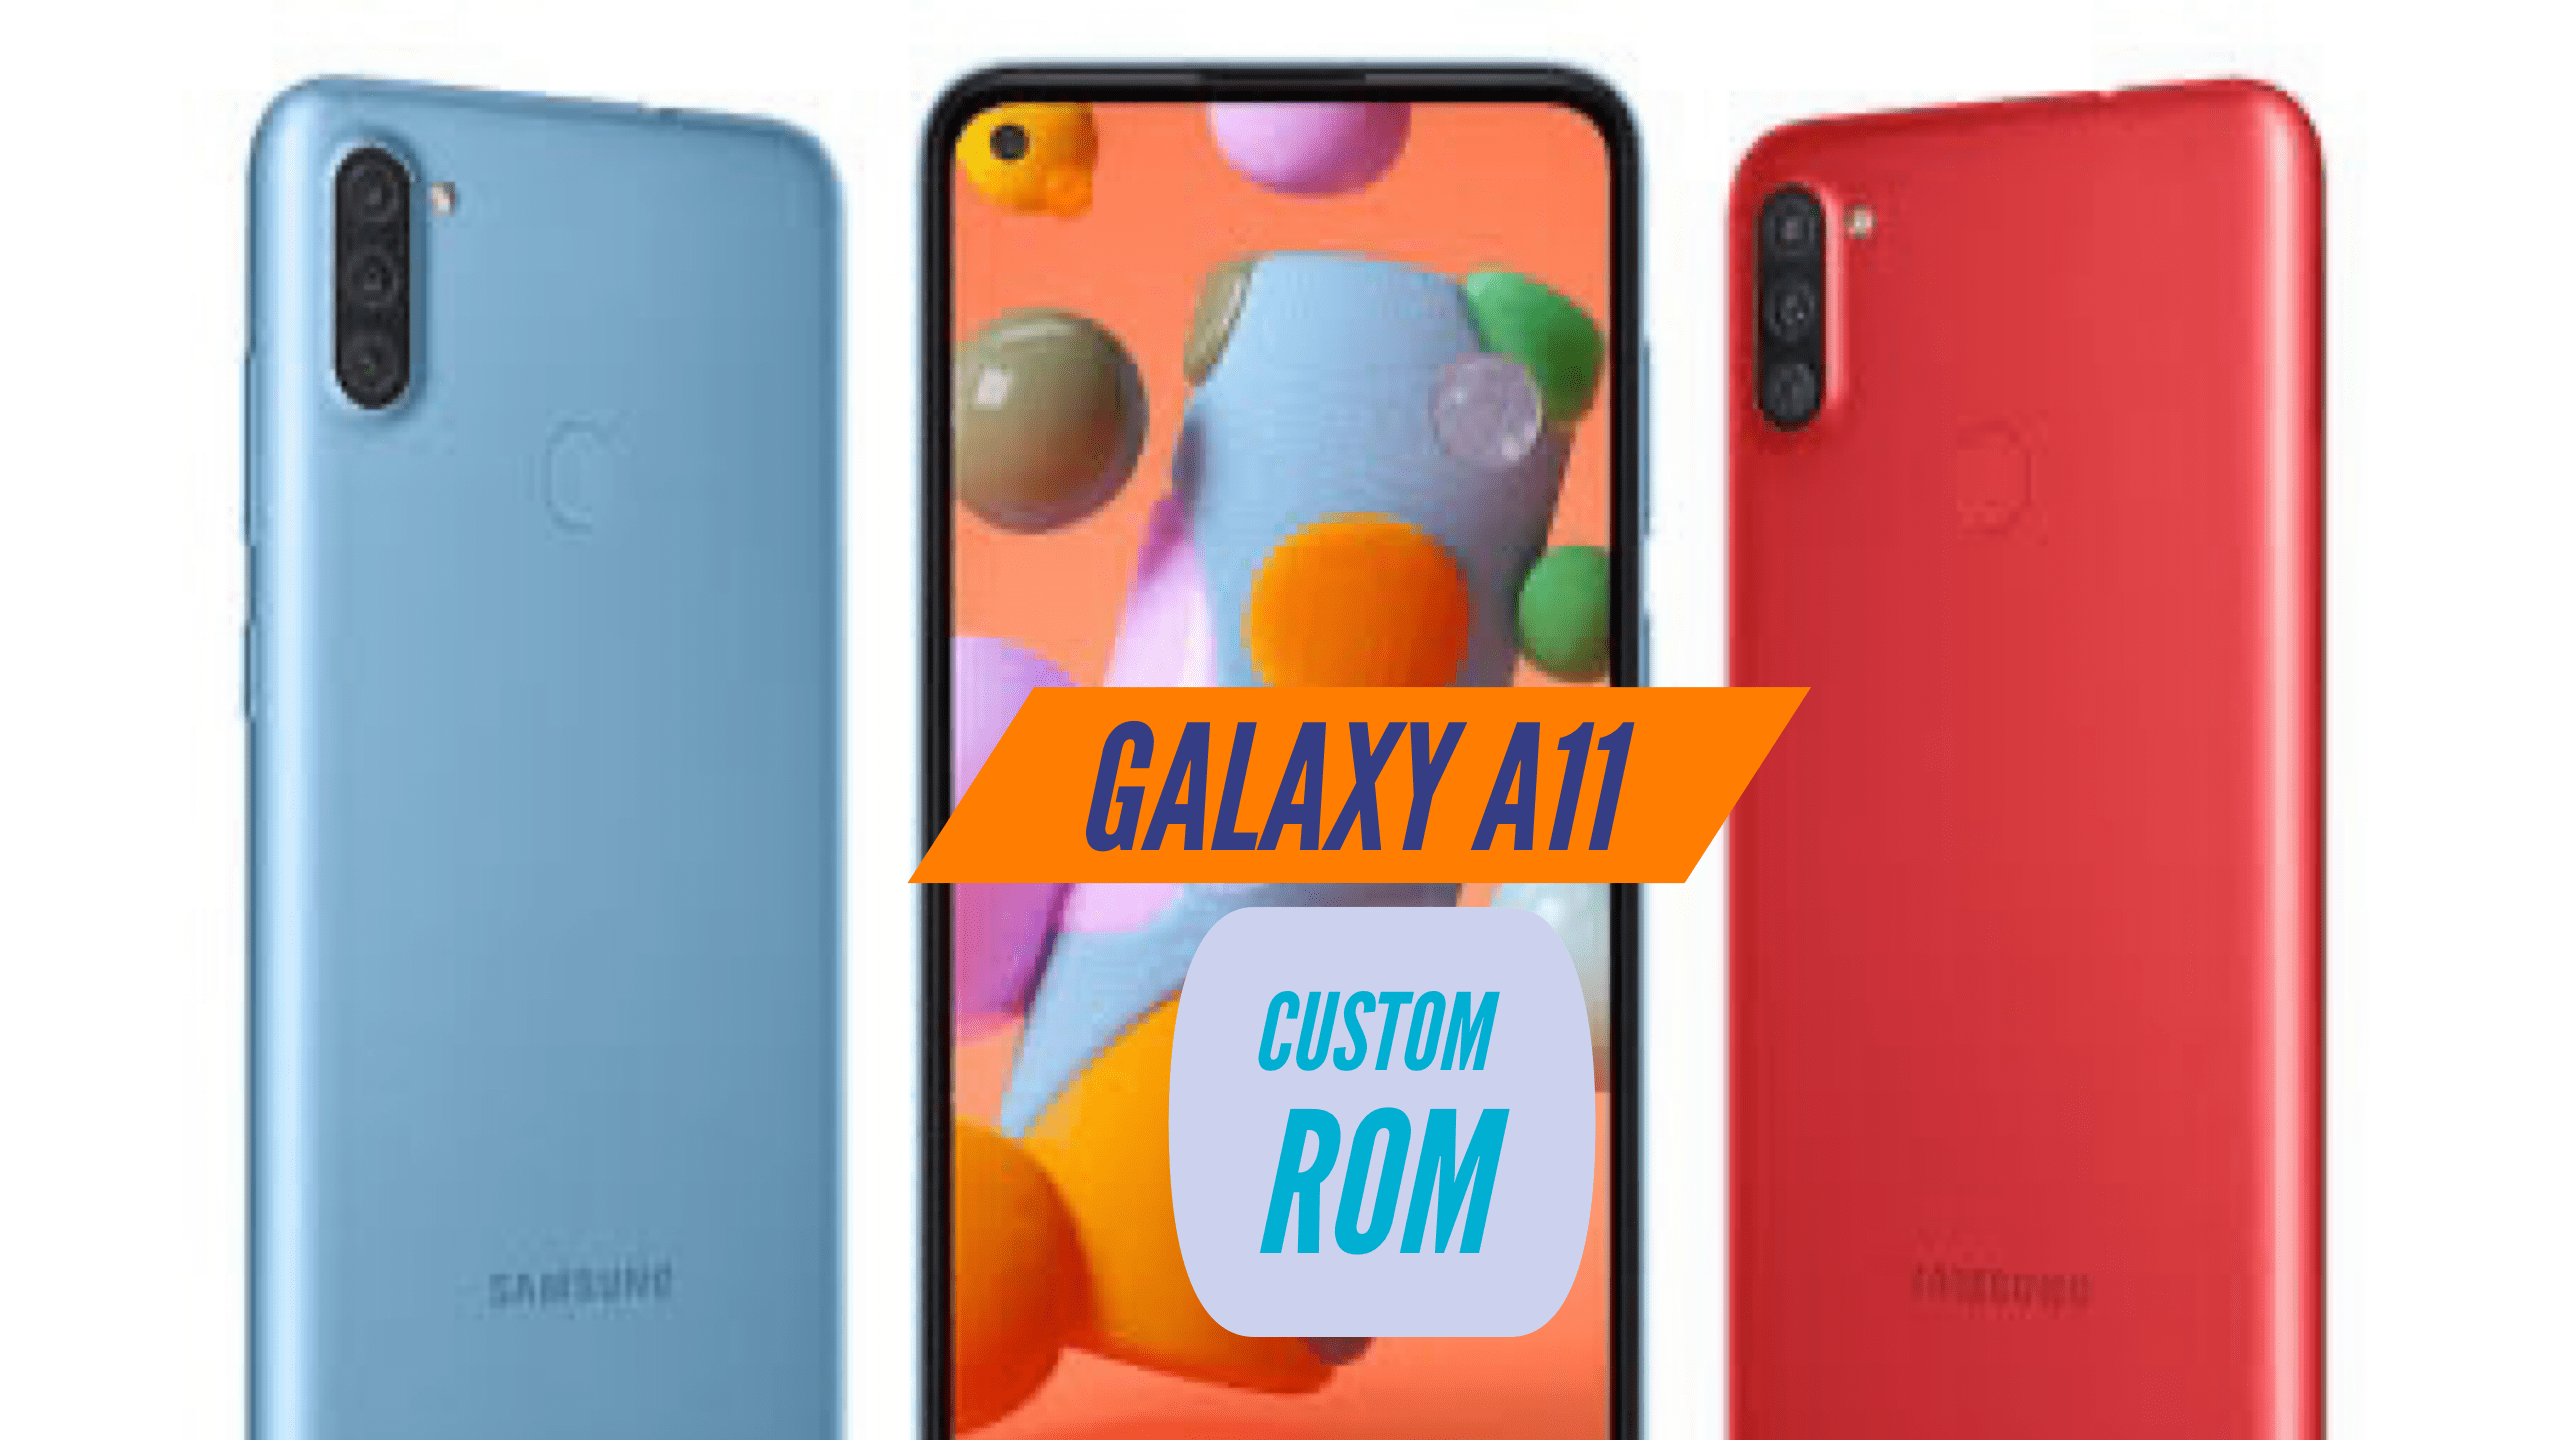 stock rom a10s binary 5 android 9